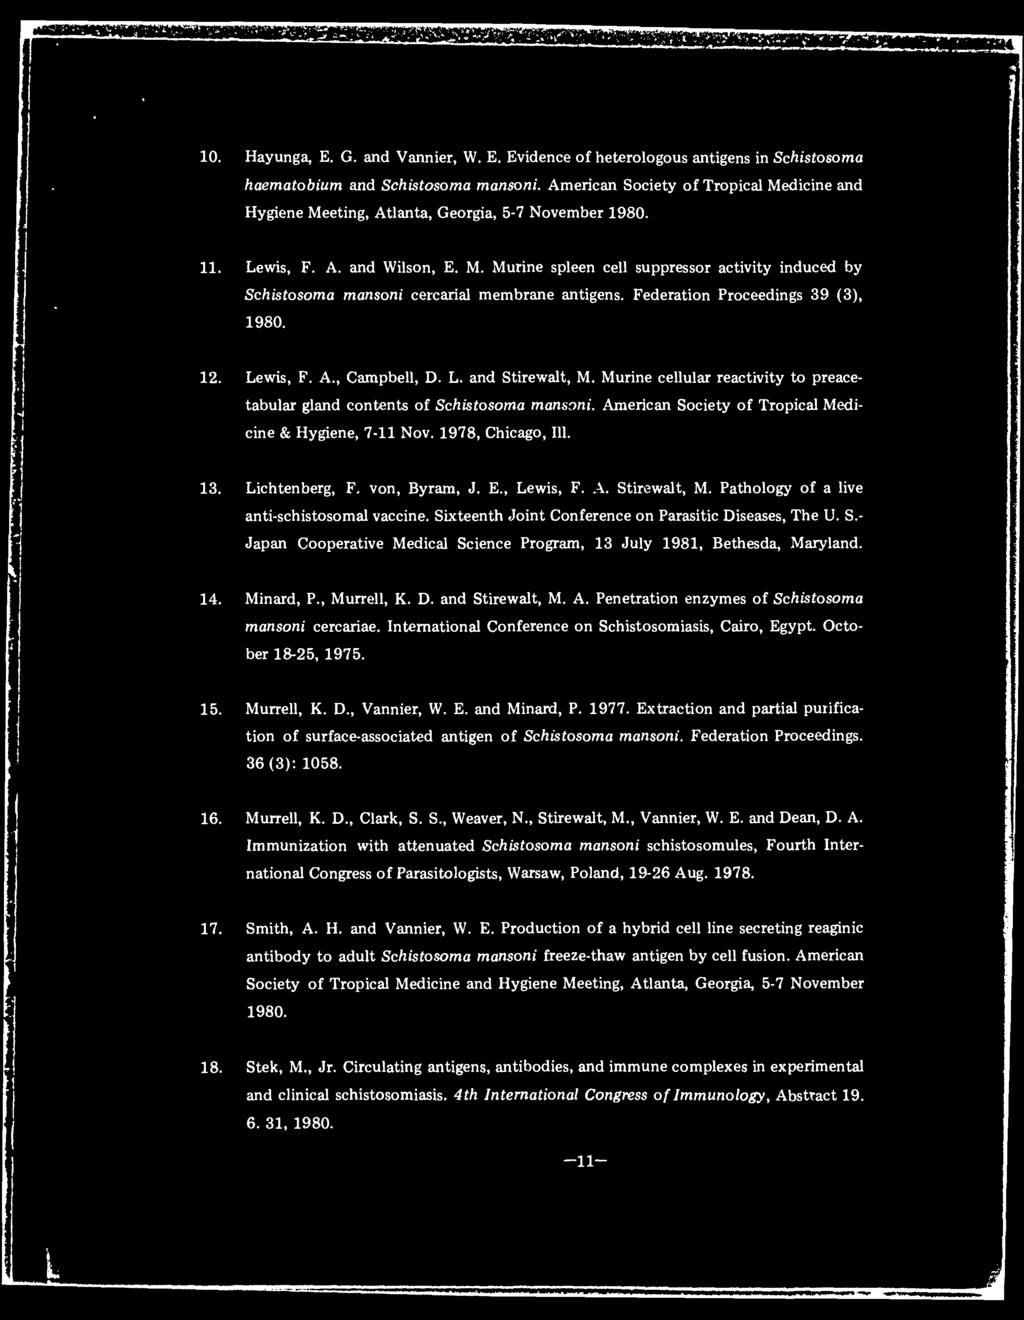 Federation Proceedings 39 (3), 1980. 12. Lewis, F. A., Campbell, D. L. and Stirewalt, M. Murine cellular reactivity to preace- tabular gland contents of Schistosoma mansoni.